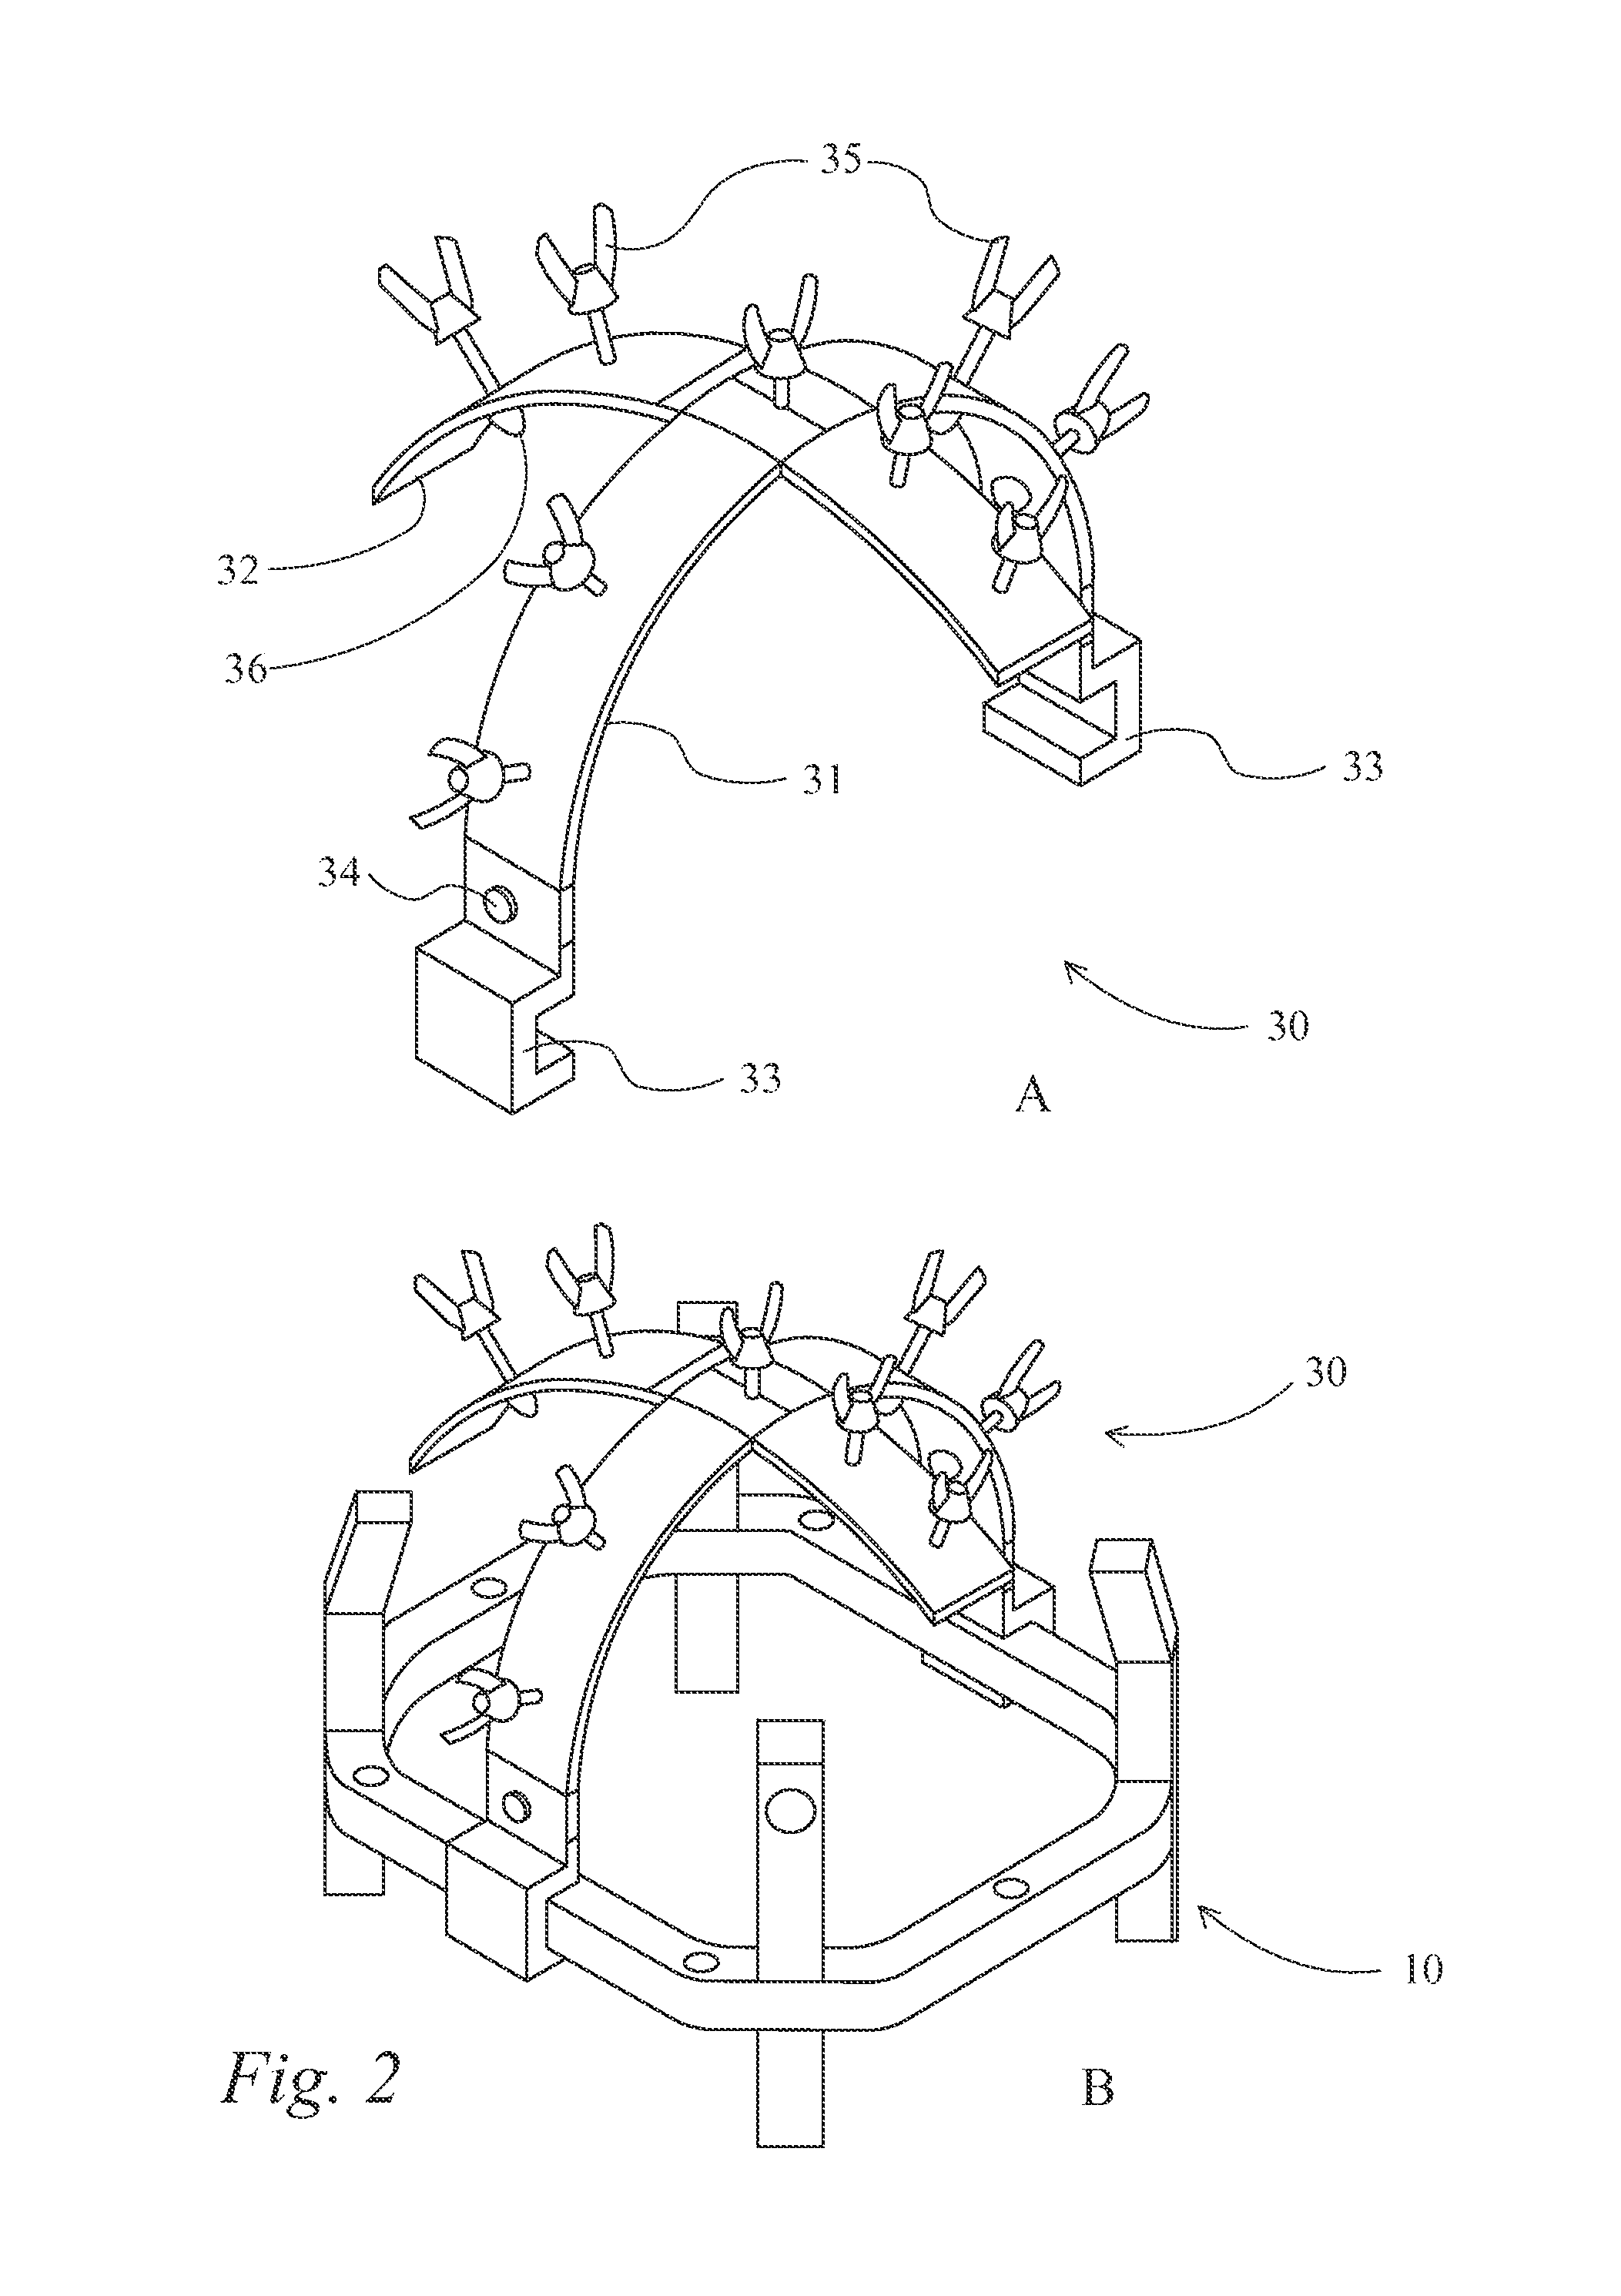 Devices and methods for positioning a stereotactic frame